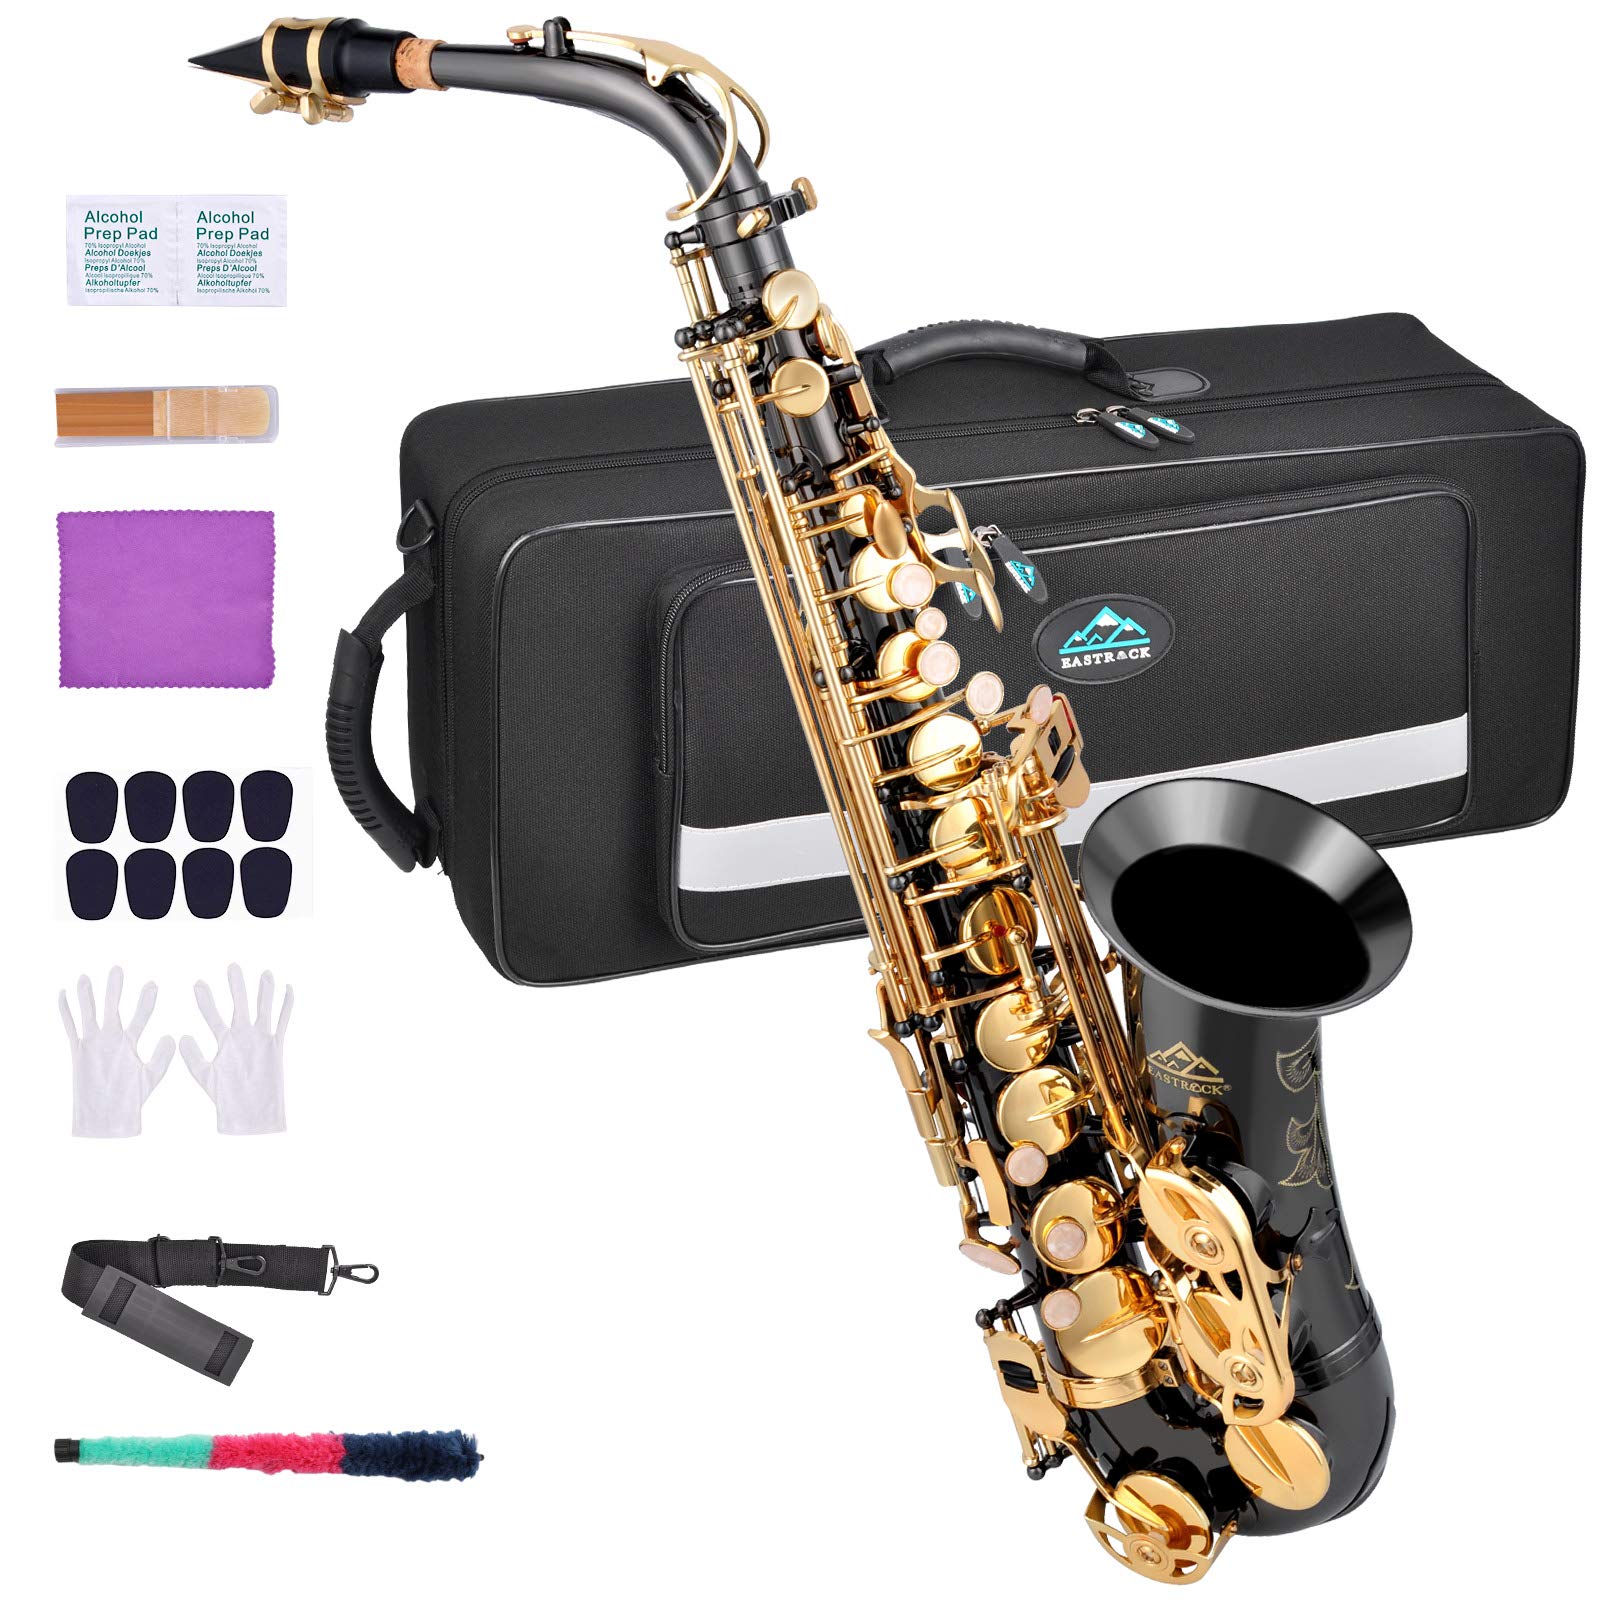 Eastrock Black Nickelgolden Alto Saxophone E Flat Sax Full Kit For Students Beginner With Carrying Case,Mouthpiece,Mouthpiece Cu